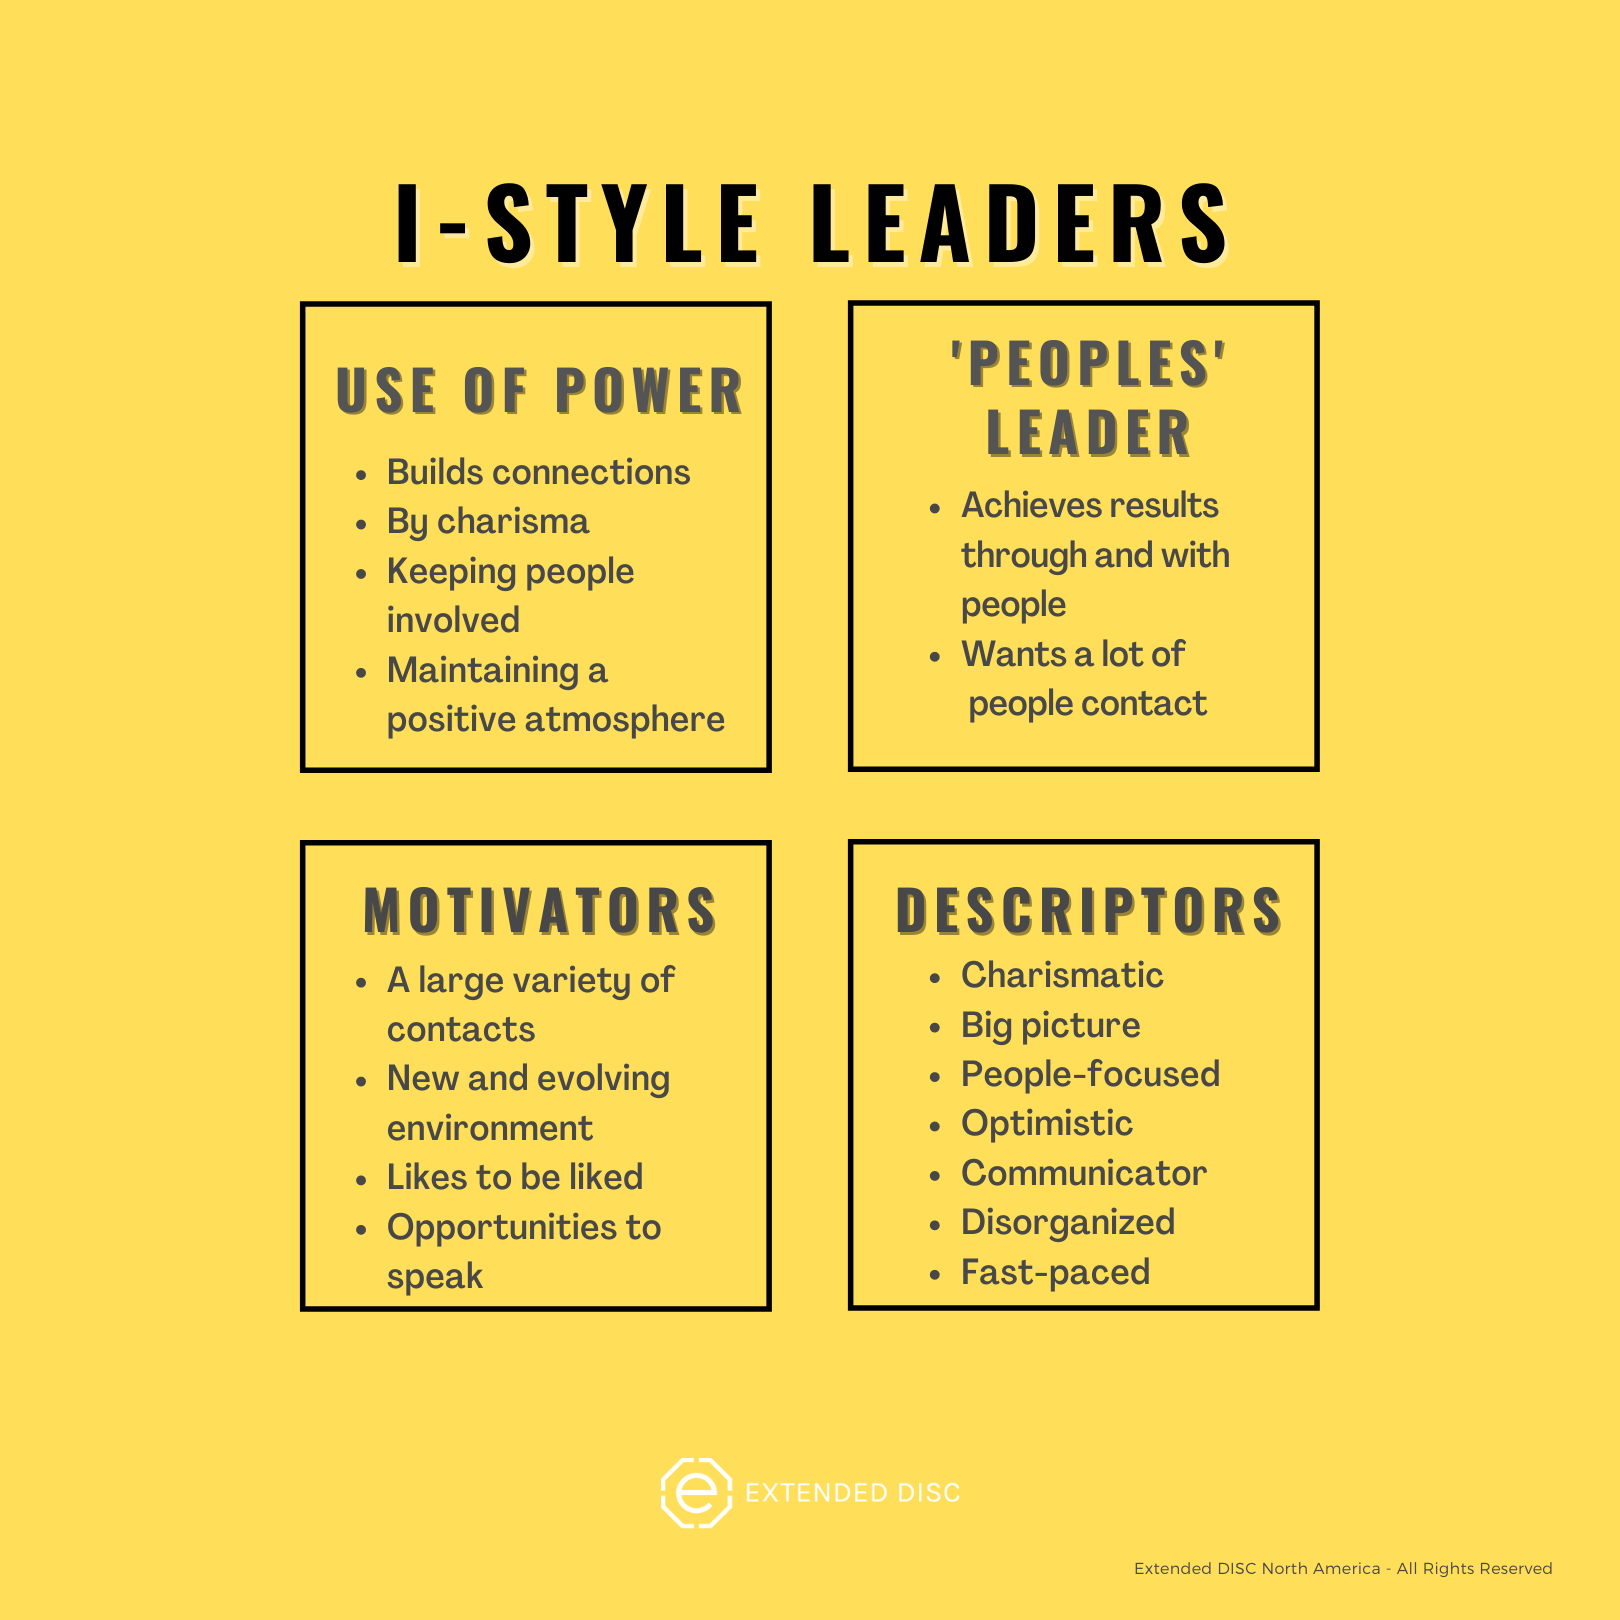 I-Style leaders